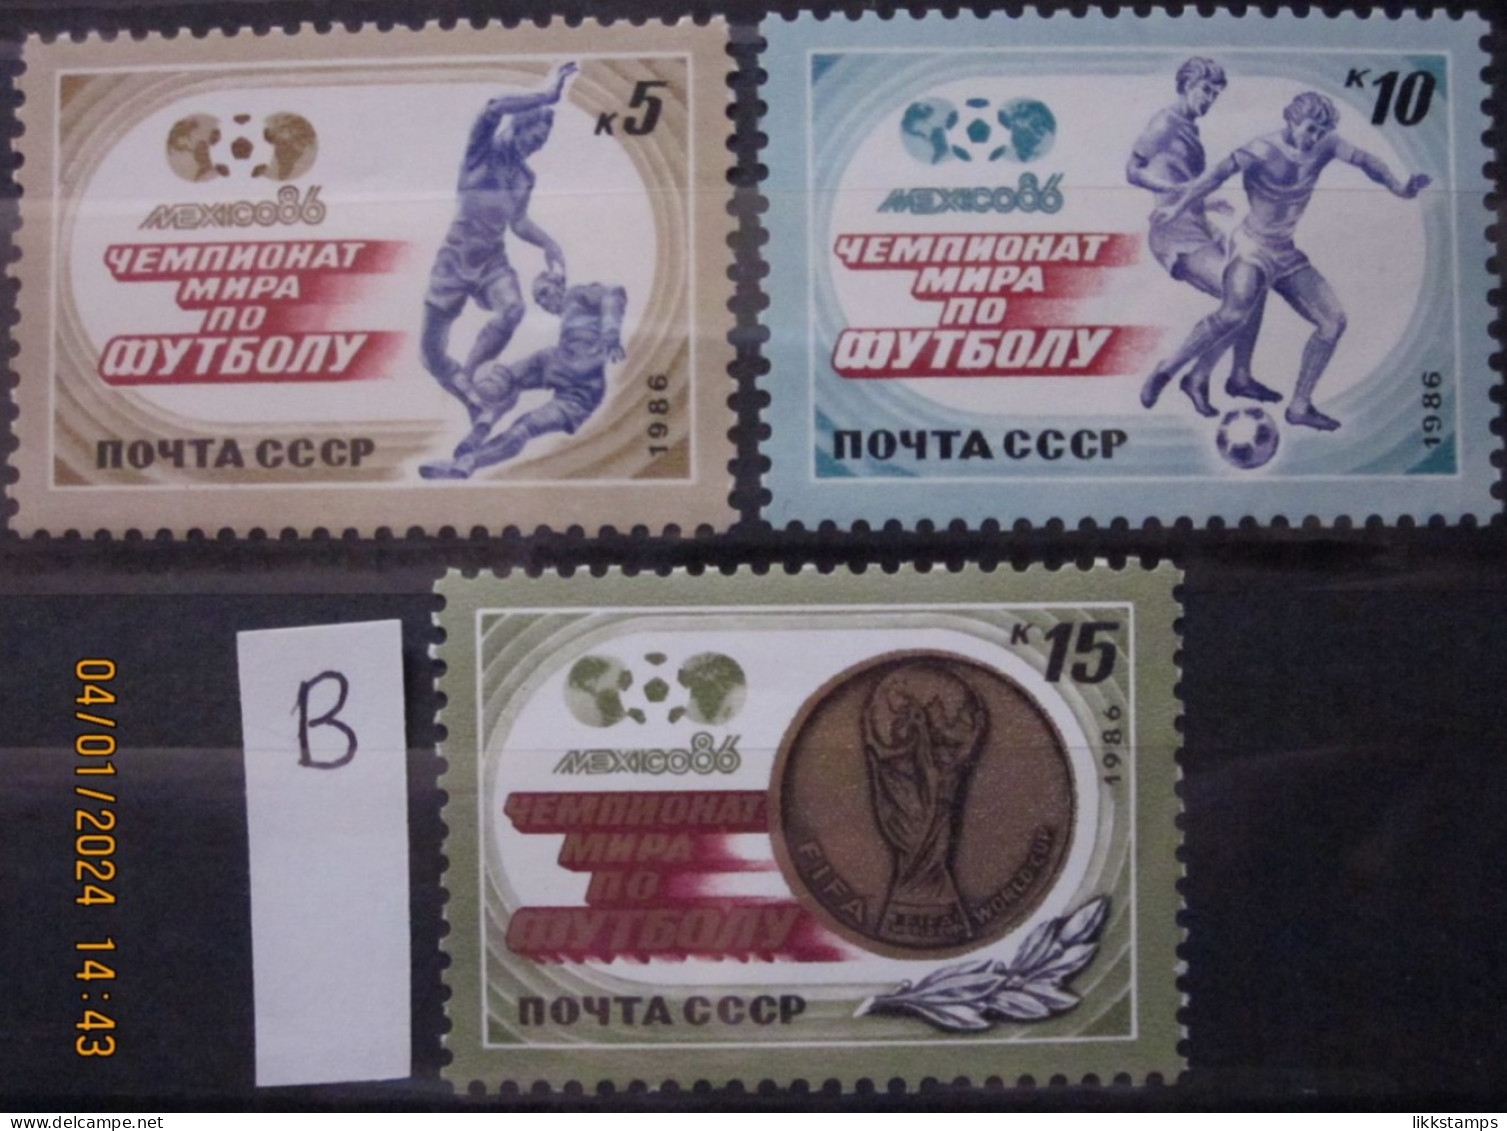 RUSSIA ~ 1986 ~ S.G. NUMBERS 5660 - 5662, ~ 'LOT B' ~ FOOTBALL. ~ MNH #03644 - Unused Stamps